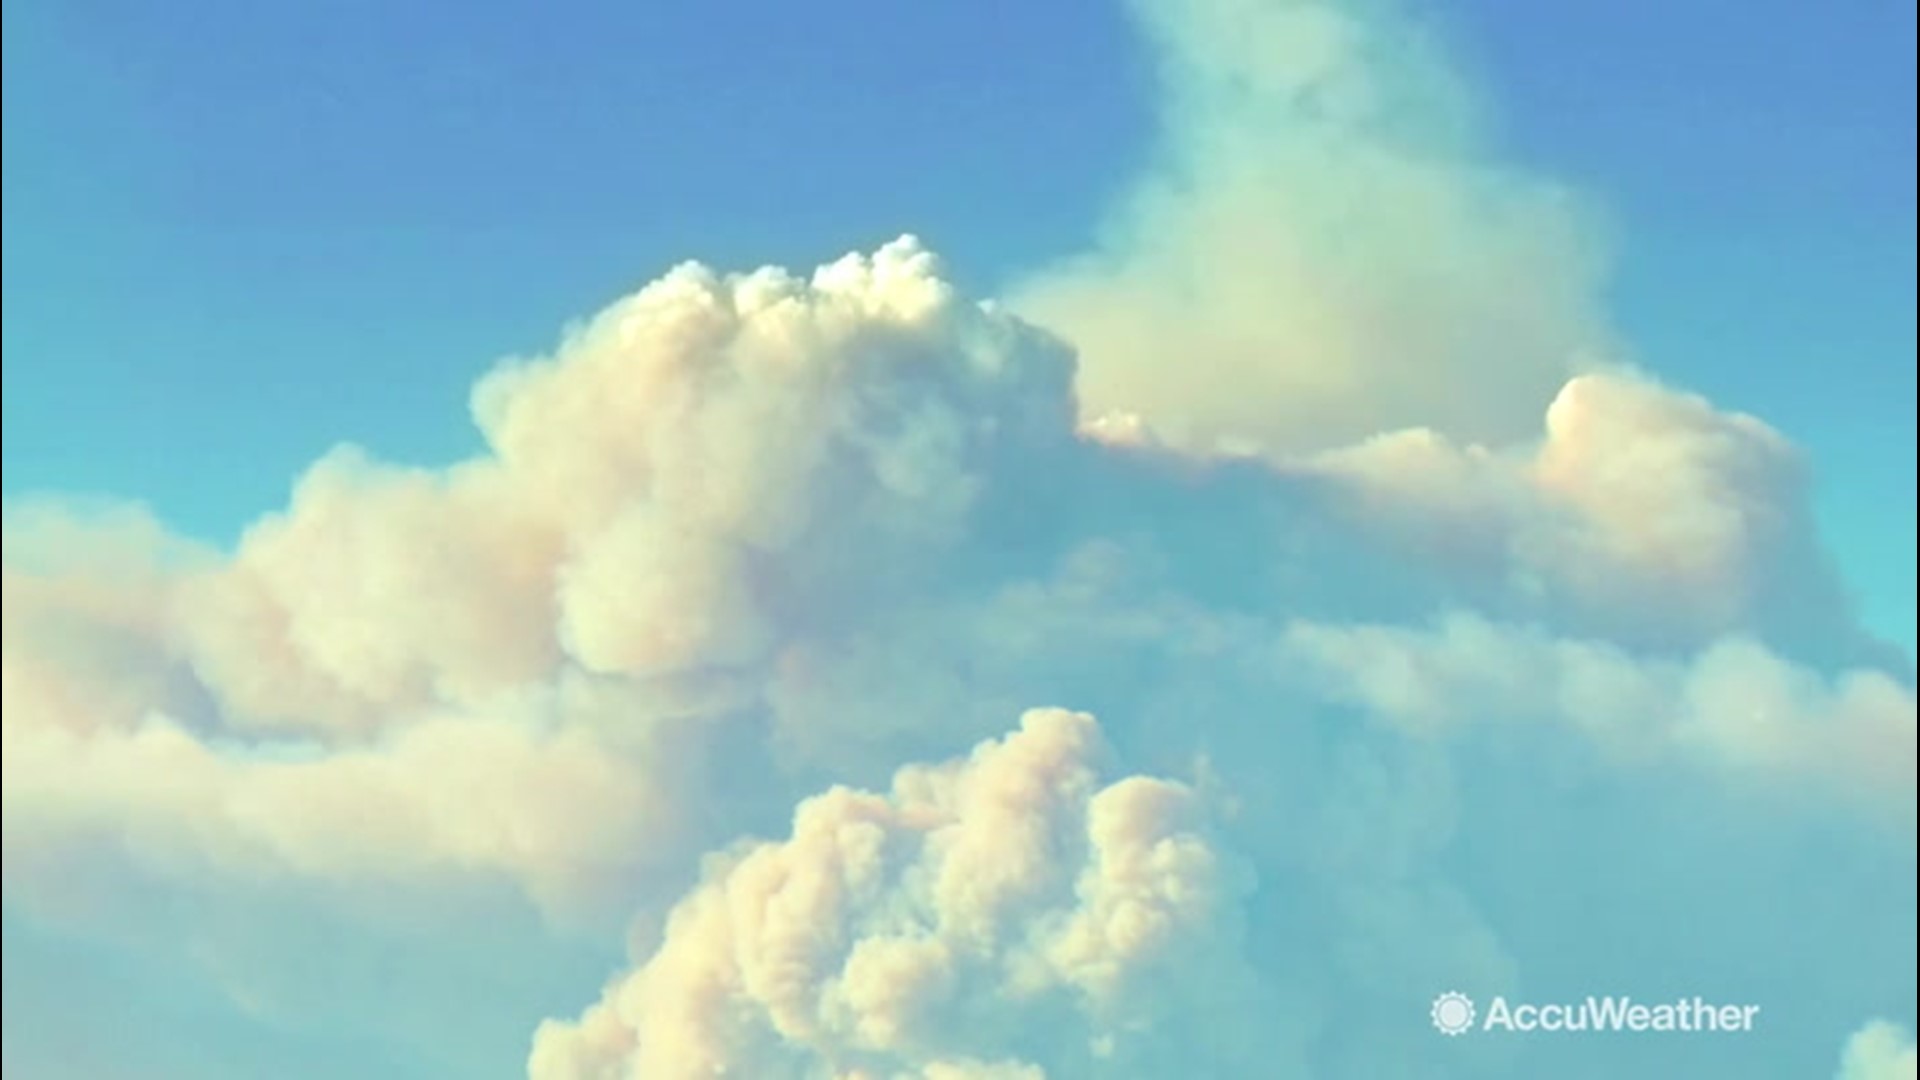 Did you know that wildfires can generate their own weather? How does it work? Let's find out.